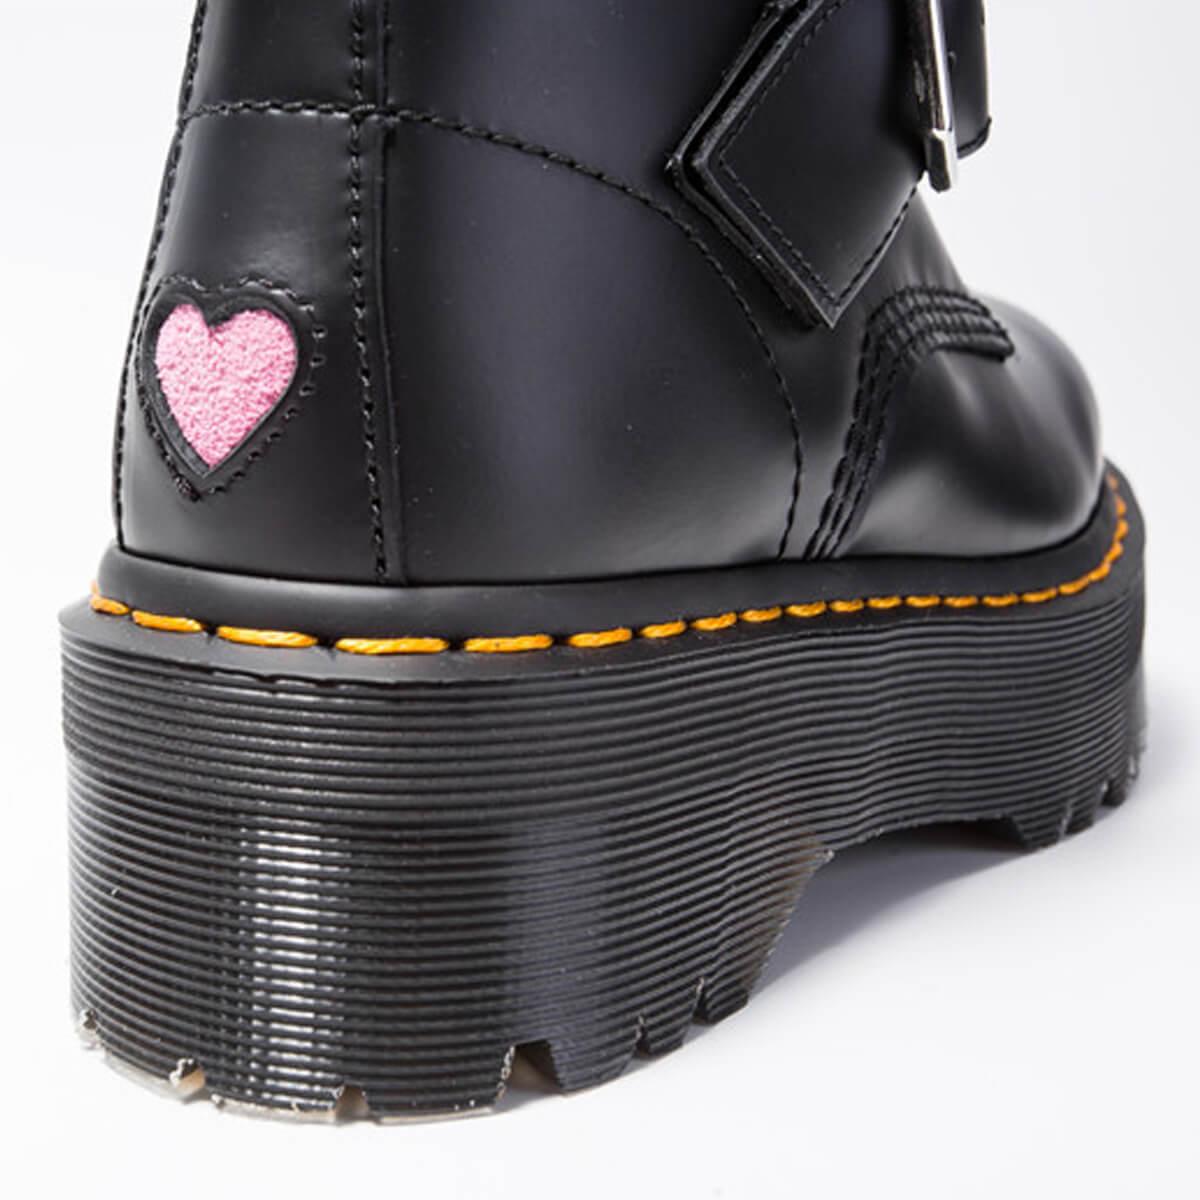 Heart Buckle Aesthetic Martens Boots - Aesthetic Clothes Shop